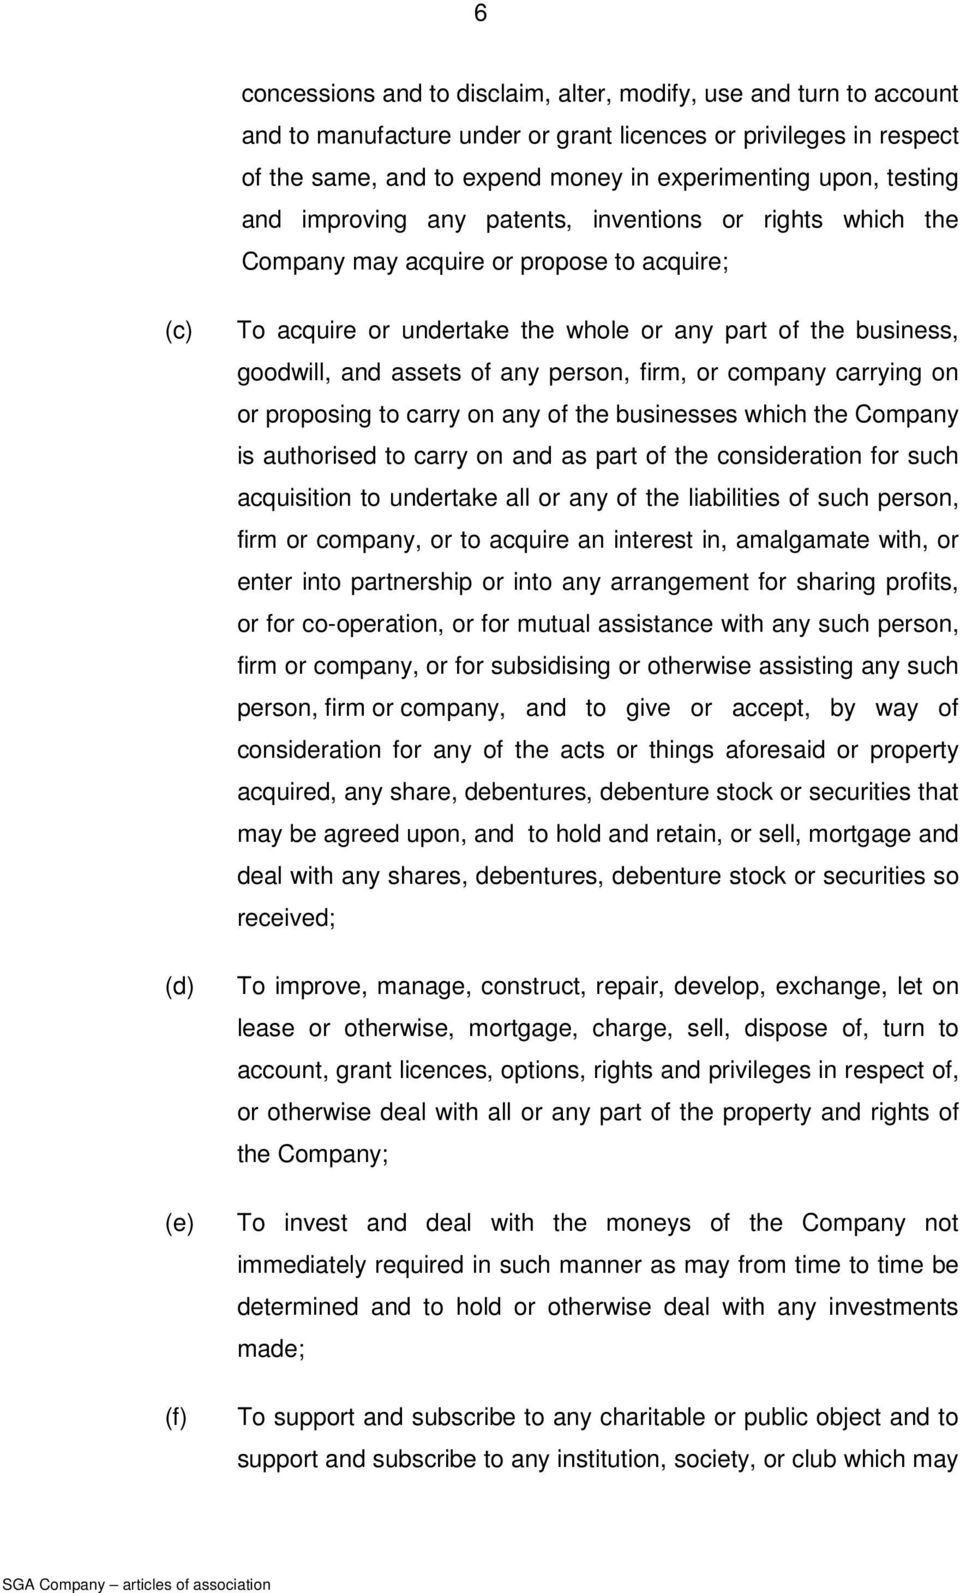 and assets of any person, firm, or company carrying on or proposing to carry on any of the businesses which the Company is authorised to carry on and as part of the consideration for such acquisition